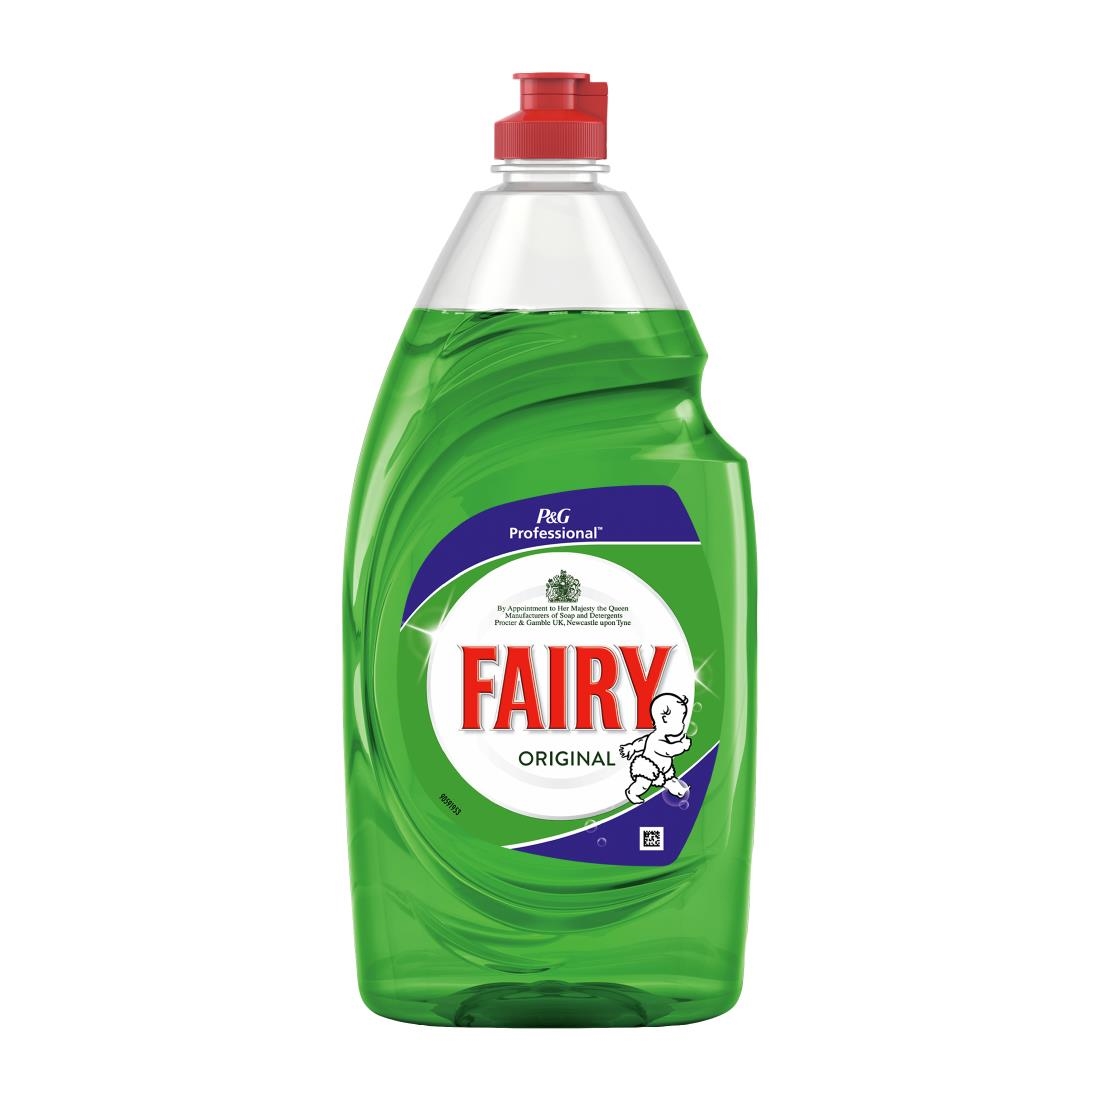 Fairy Professional Concentrated Washing Up Liquid Original 900ml Pack of 6 (DX556)